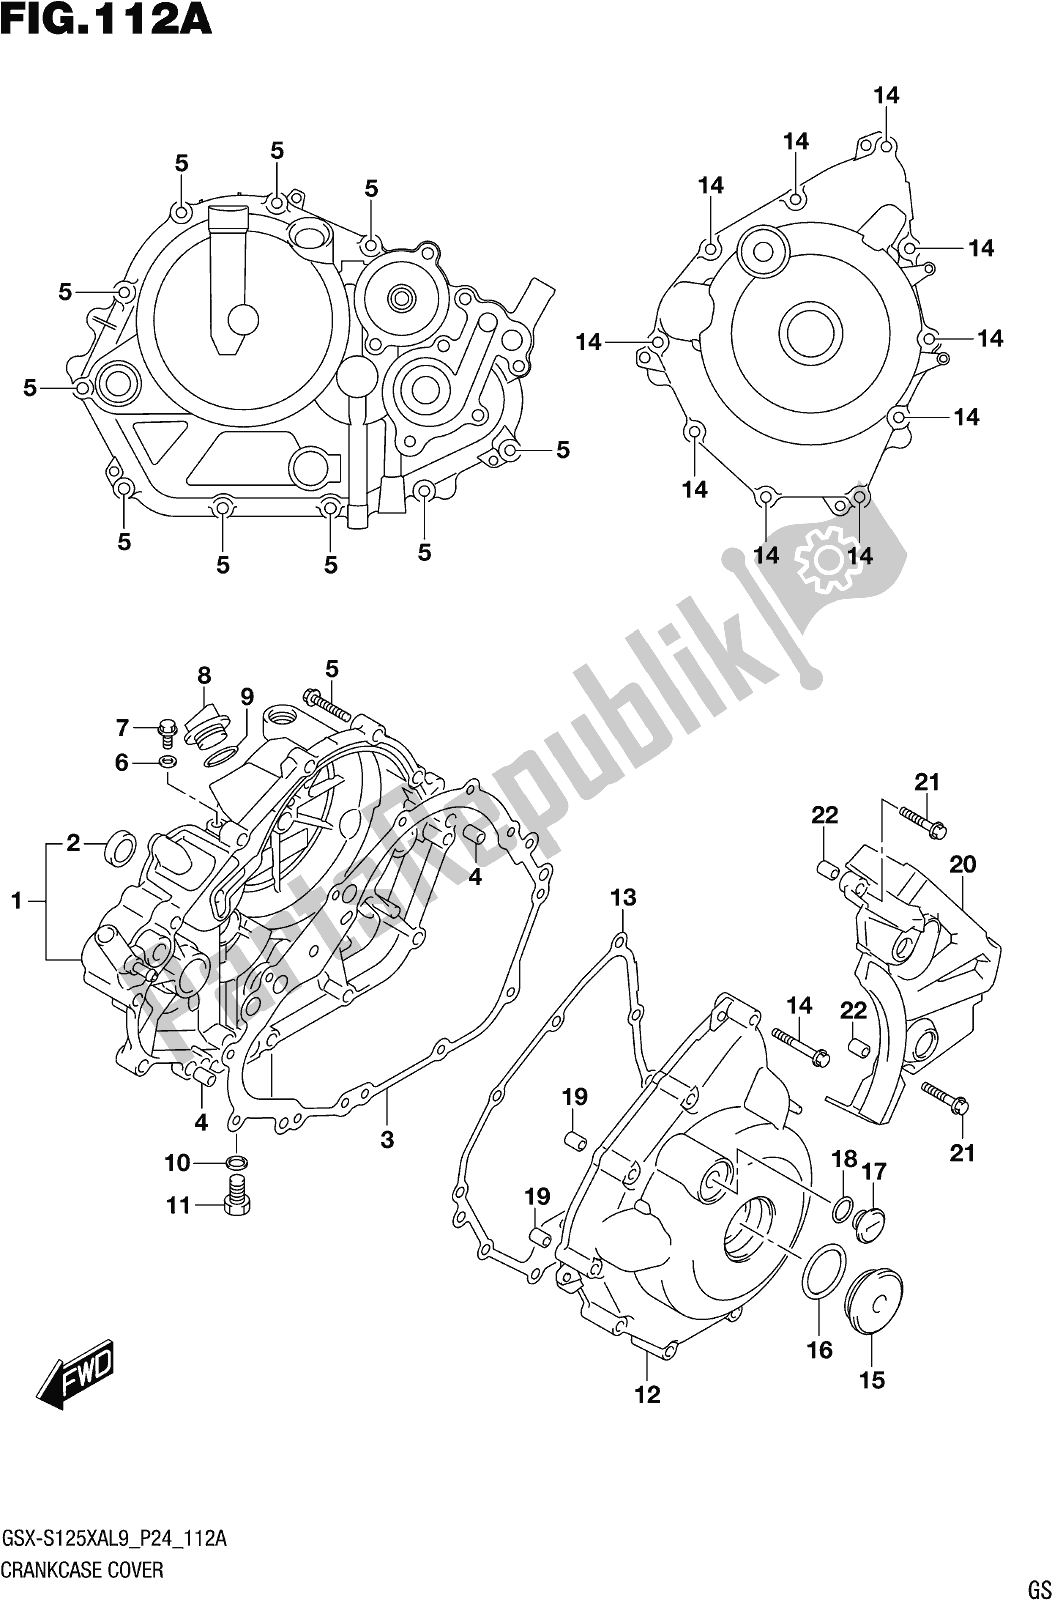 All parts for the Fig. 112a Crankcase Cover of the Suzuki Gsx-s 125 XA 2019